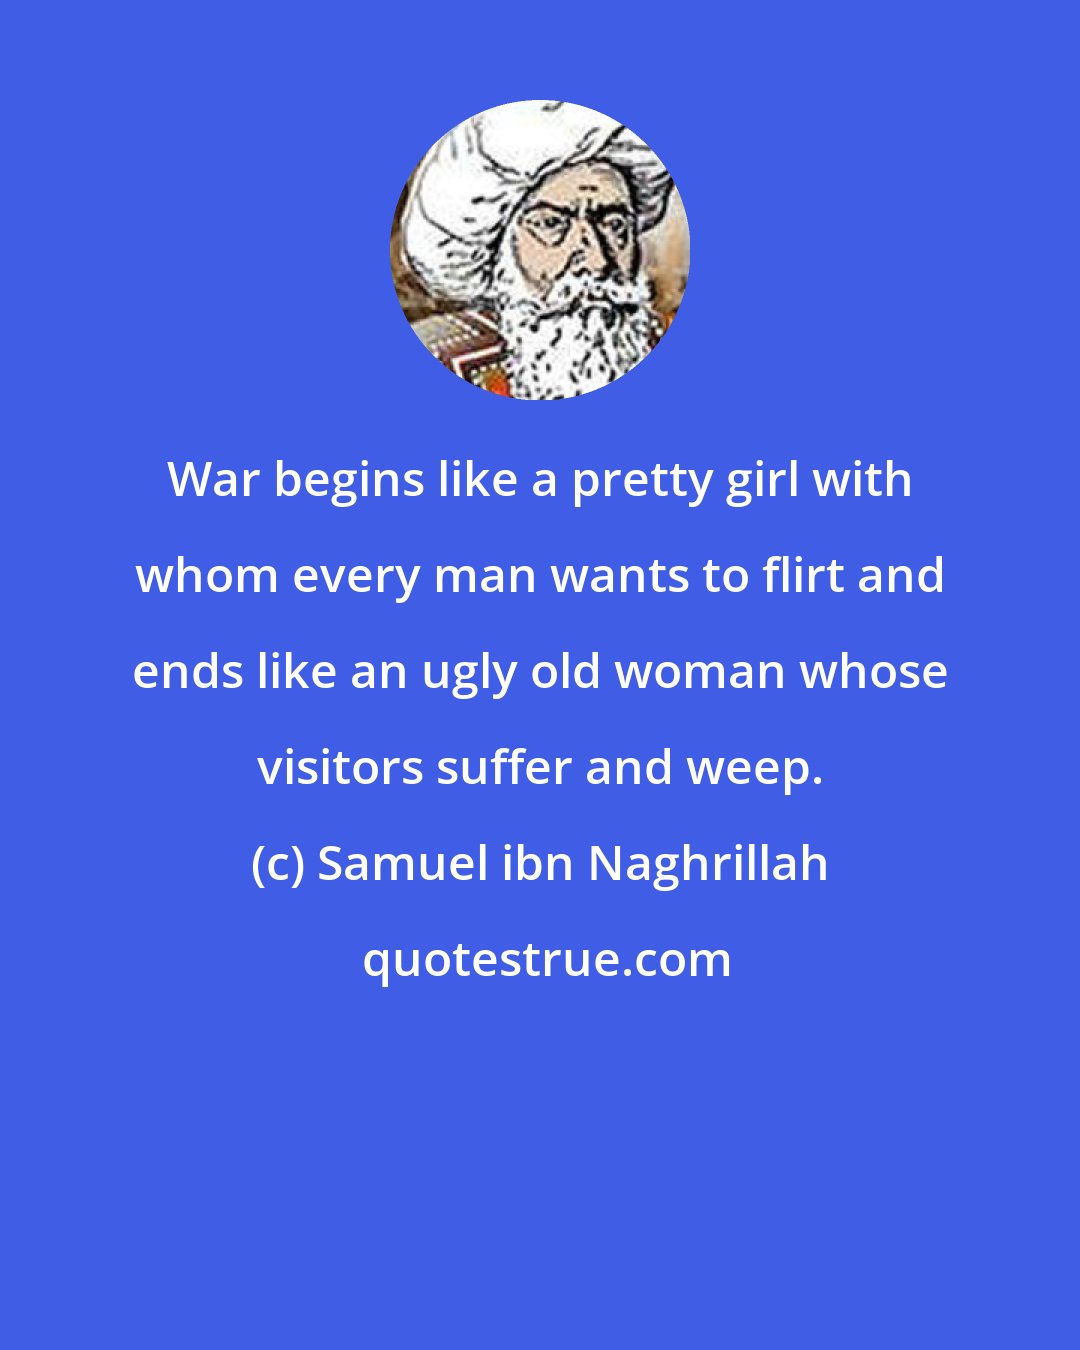 Samuel ibn Naghrillah: War begins like a pretty girl with whom every man wants to flirt and ends like an ugly old woman whose visitors suffer and weep.